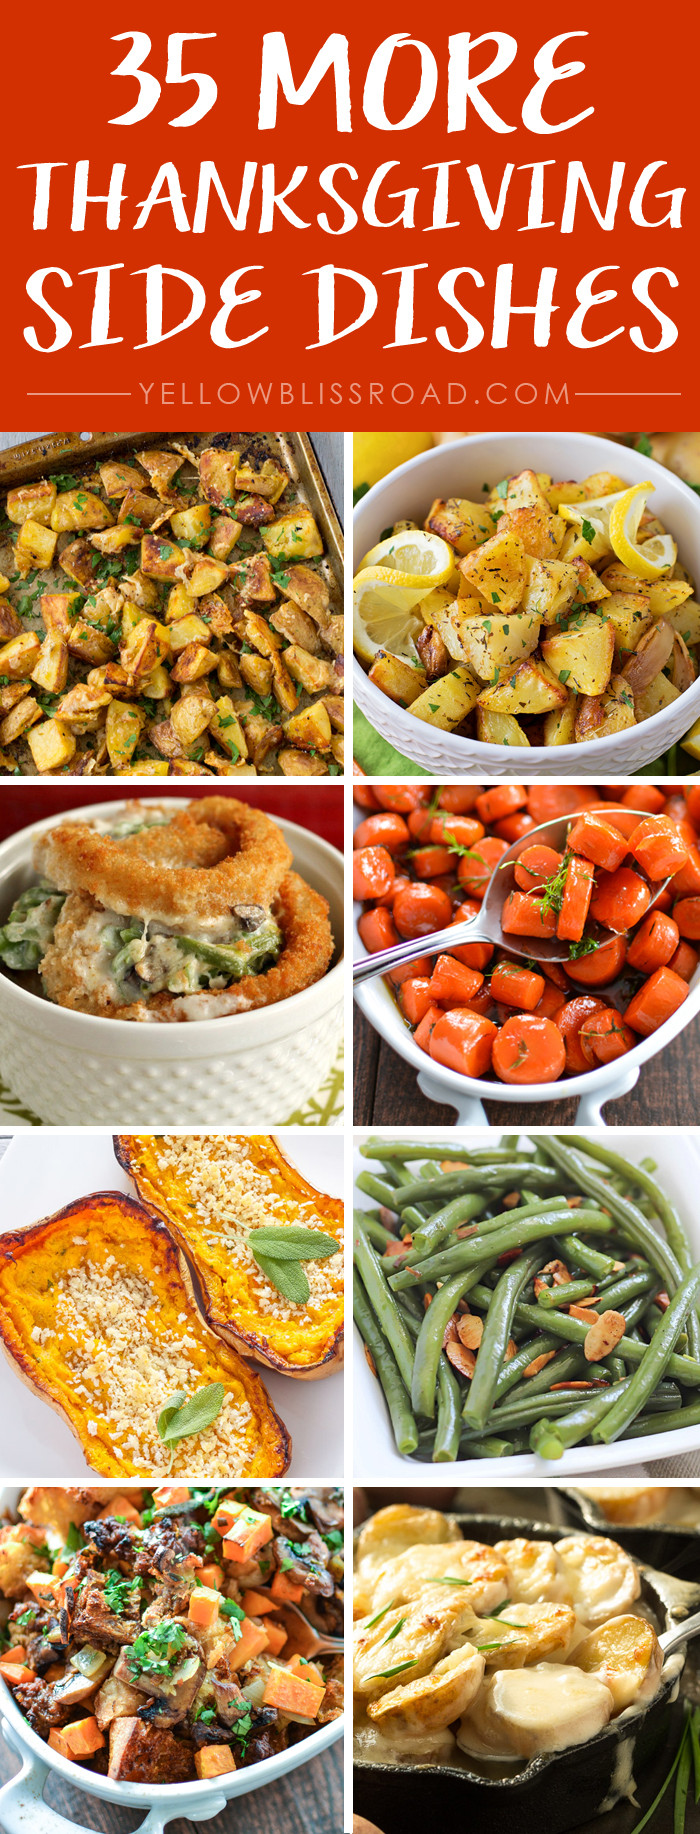 Side Dishes For Thanksgiving
 Twice Baked Potato Casserole with Potato Chip Crust